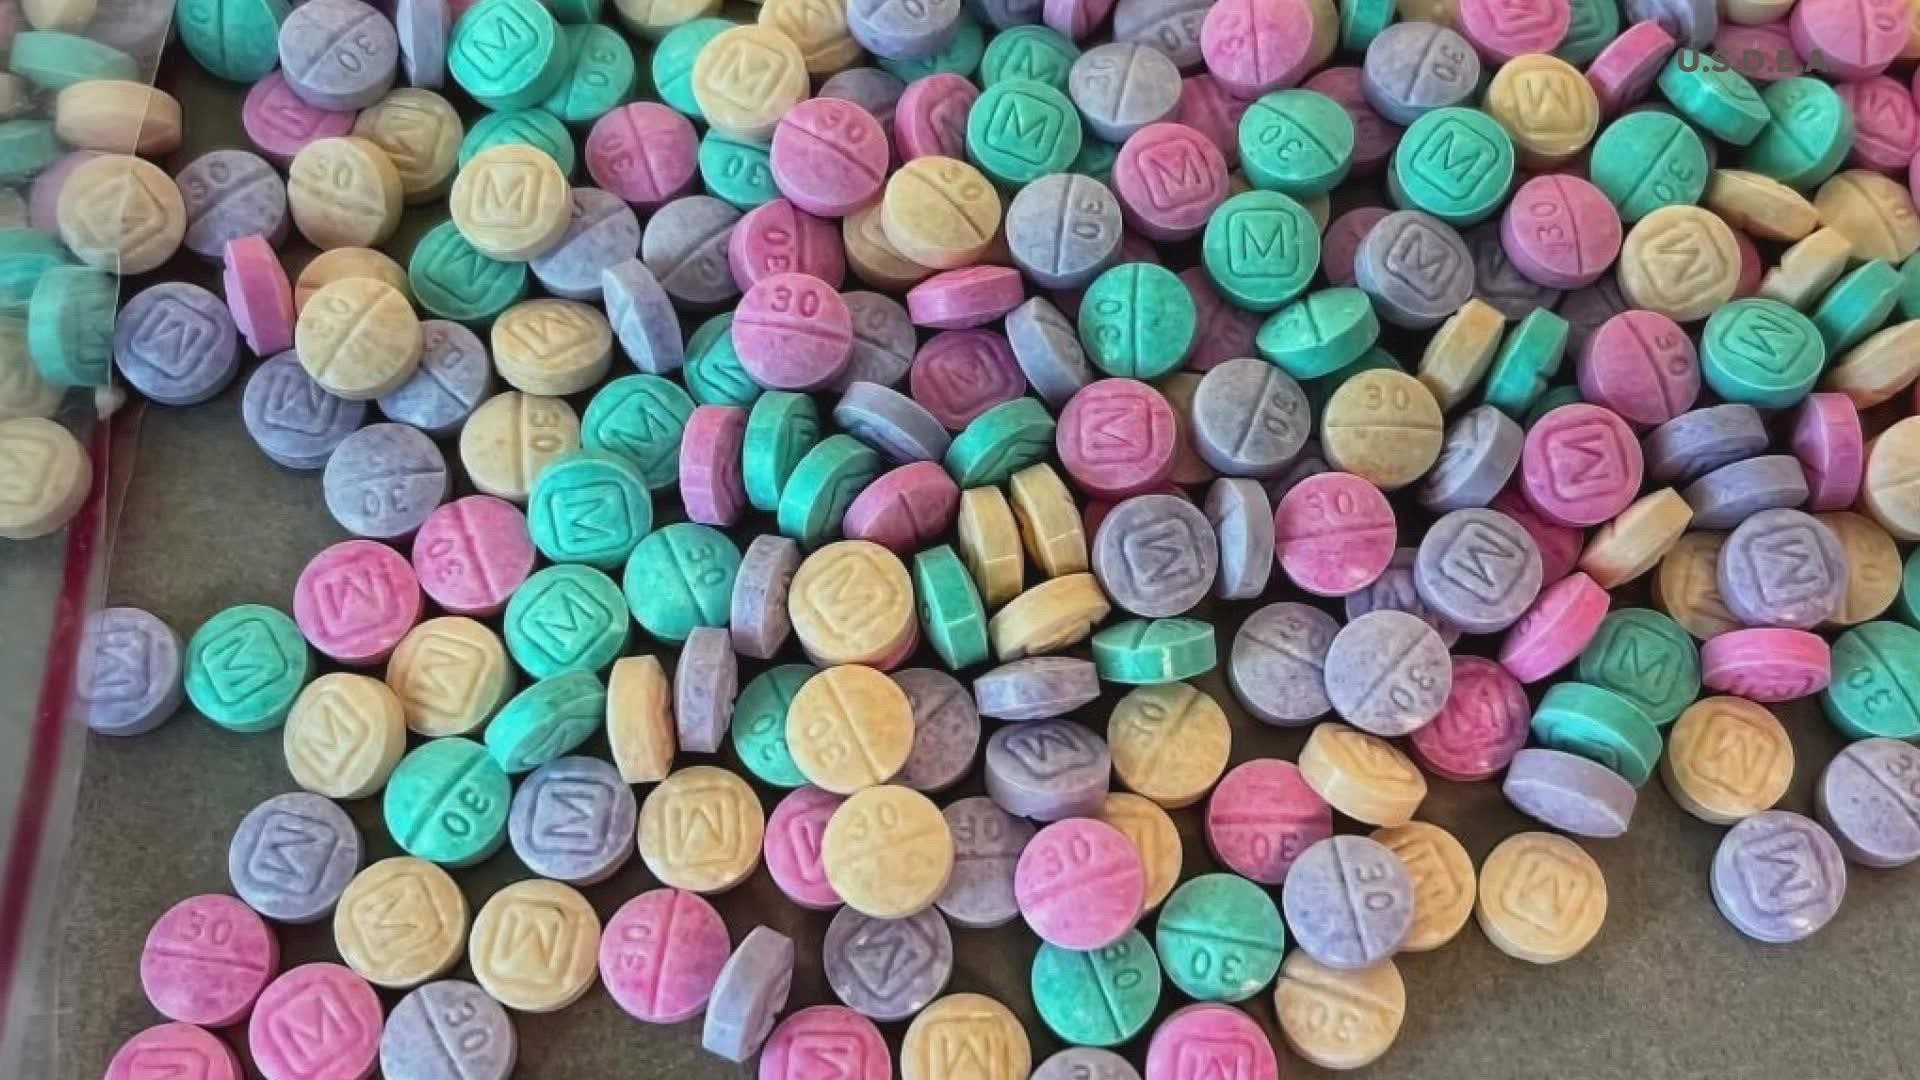 A local D.E.A. agents said they've had five multiple-kilo rainbow fentanyl seizures in St. Louis since August.